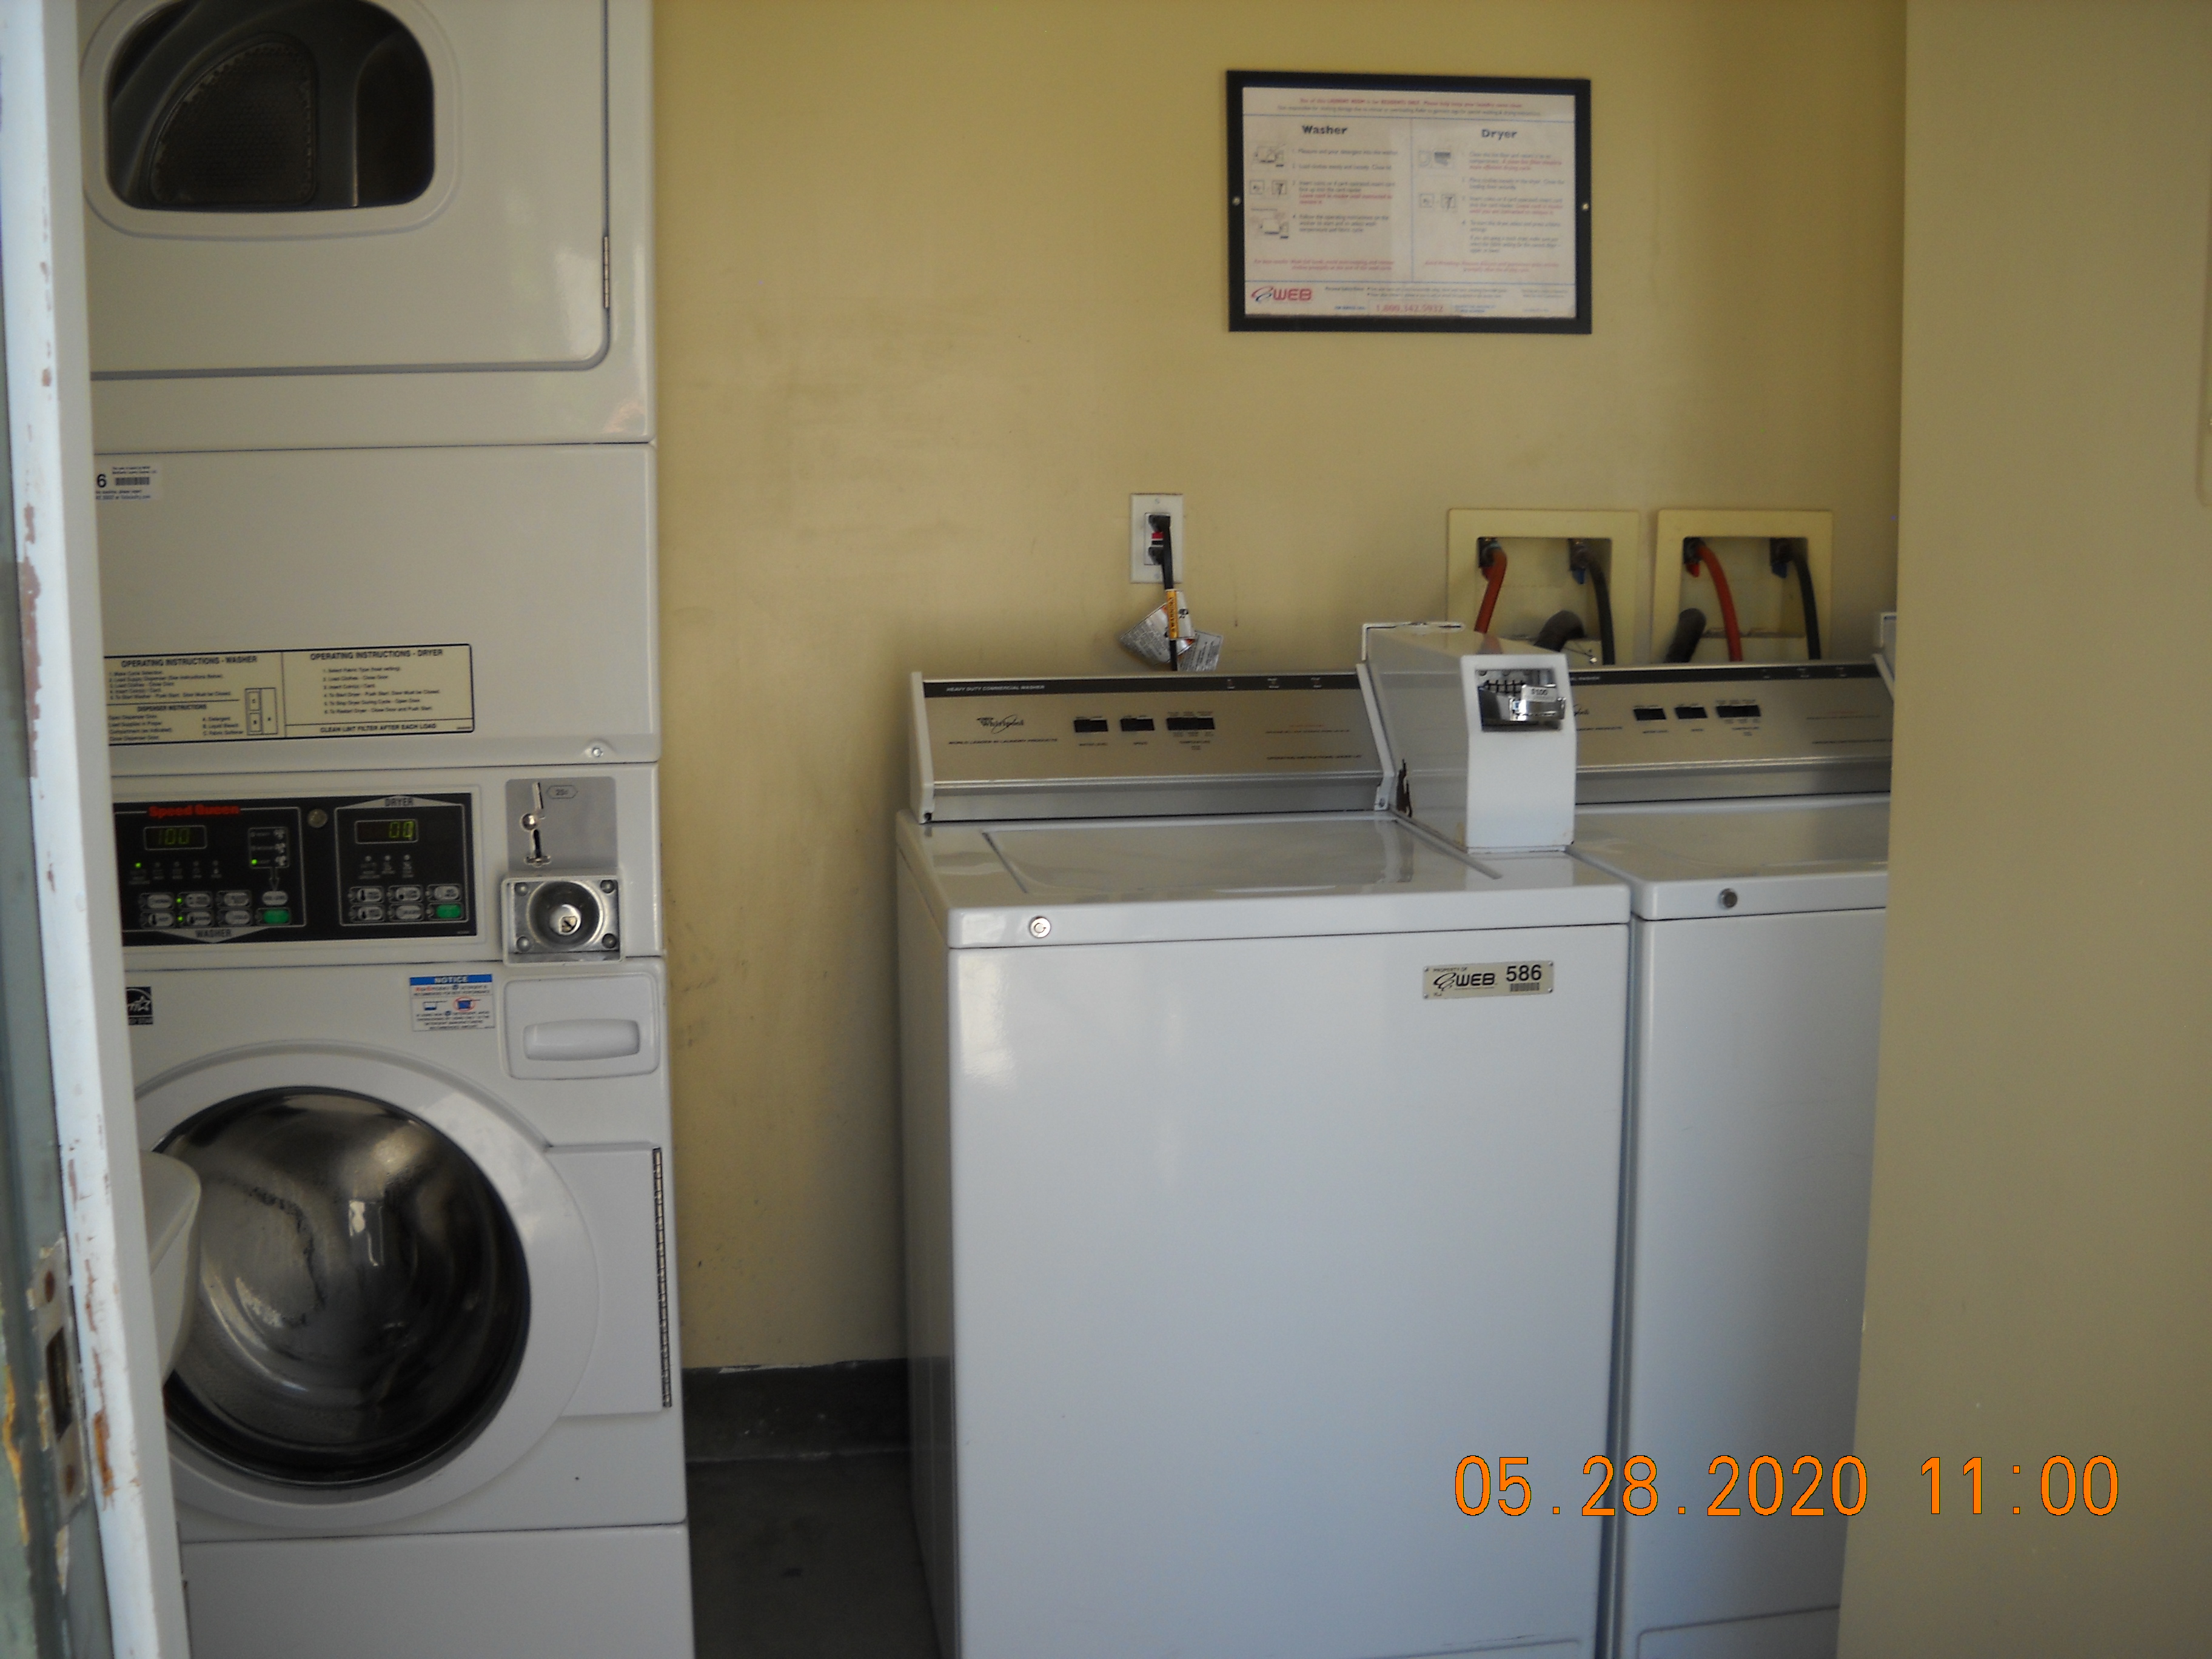 Laundry room with four machines visble, and an instruction sign posted on the wall.